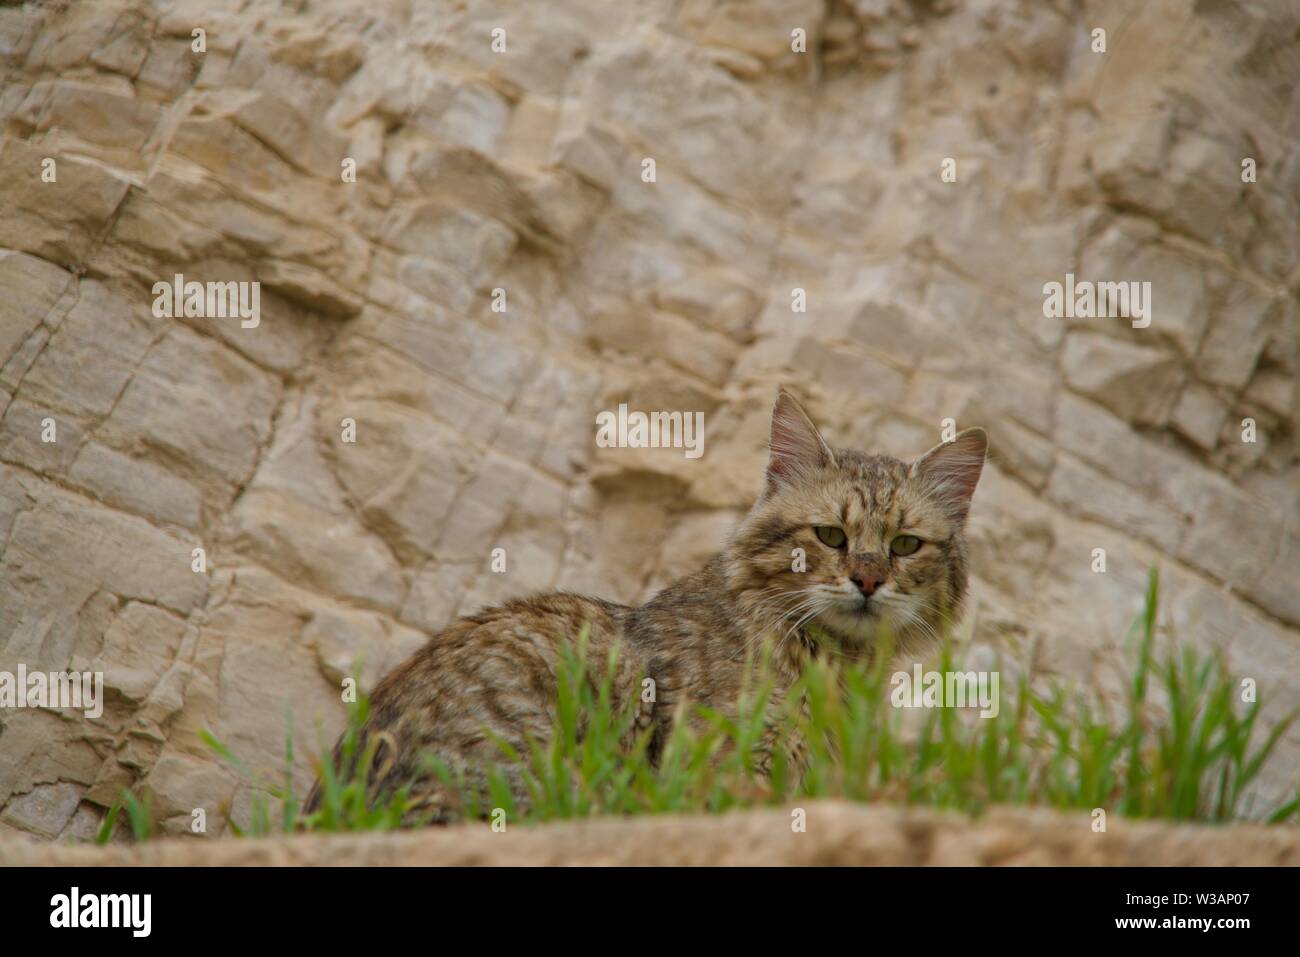 Unique view up to a cat lying in some grass on the bottom, a rock in the background Stock Photo